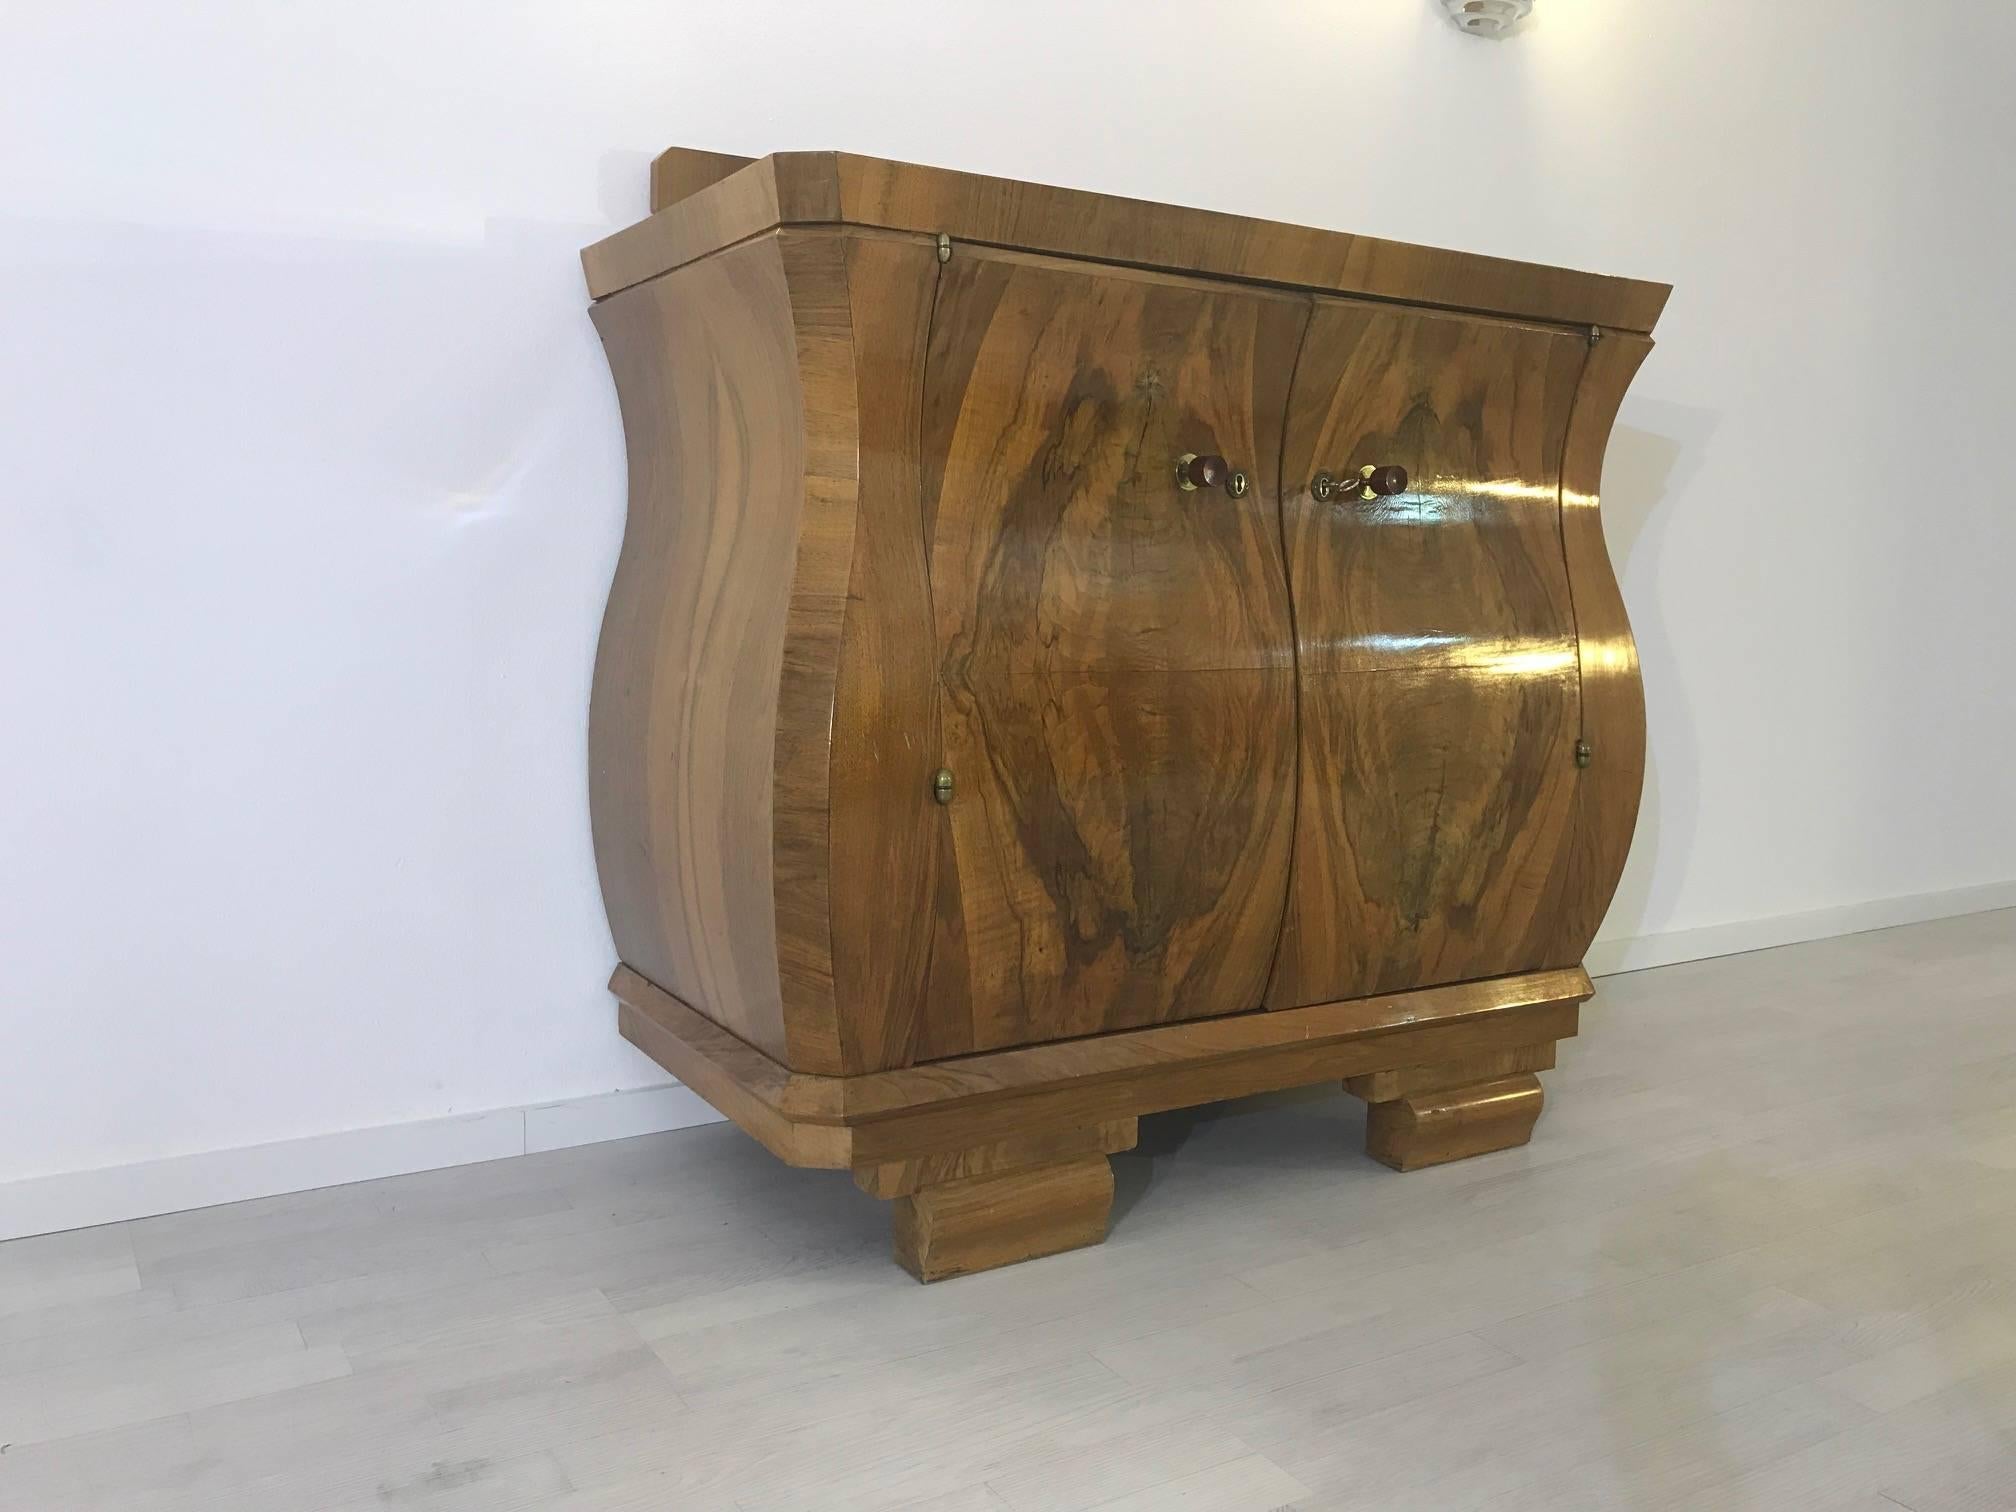 Wonderful Art Deco commode made of luxurious walnut wood with a stunning grain. Beautiful French single piece from the 1920s with an elegant tulip body. Offers great curved doors and an amazing hutch on top.

 French original piece from the Art